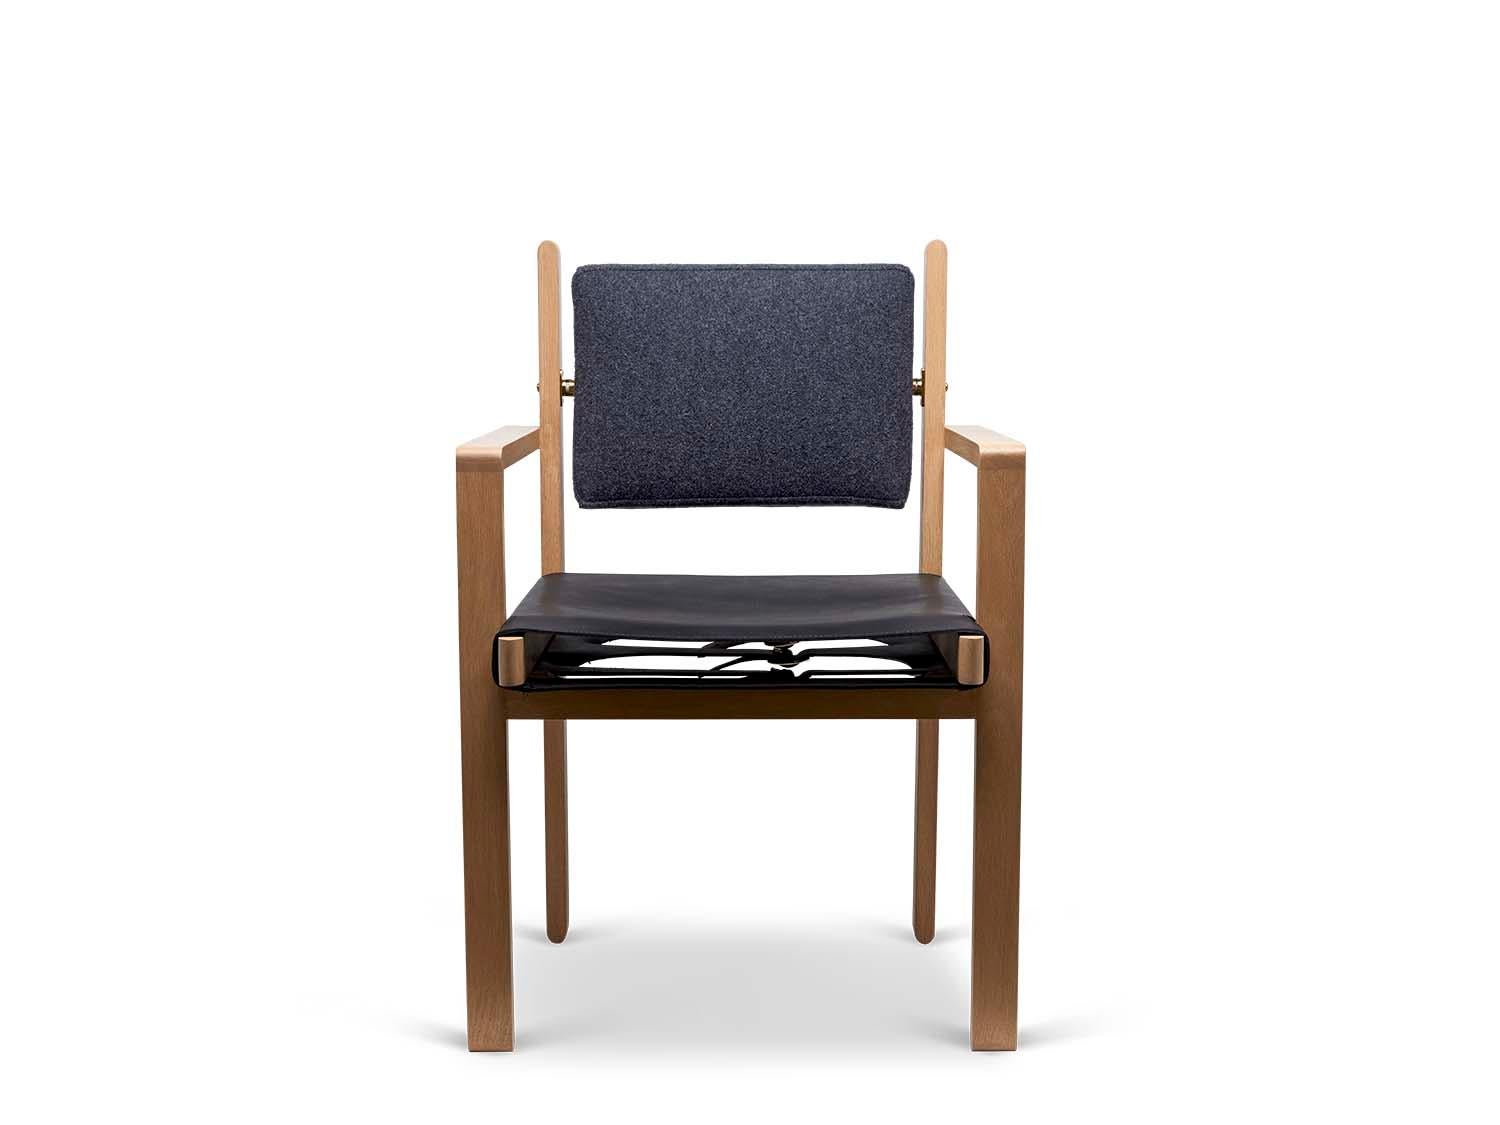 The Morro dining chair is made from a solid American walnut or white oak frame and features an upholstered back cushion and a leather sling seat.

The Lawson-Fenning Collection is designed and handmade in Los Angeles, California. Reach out to